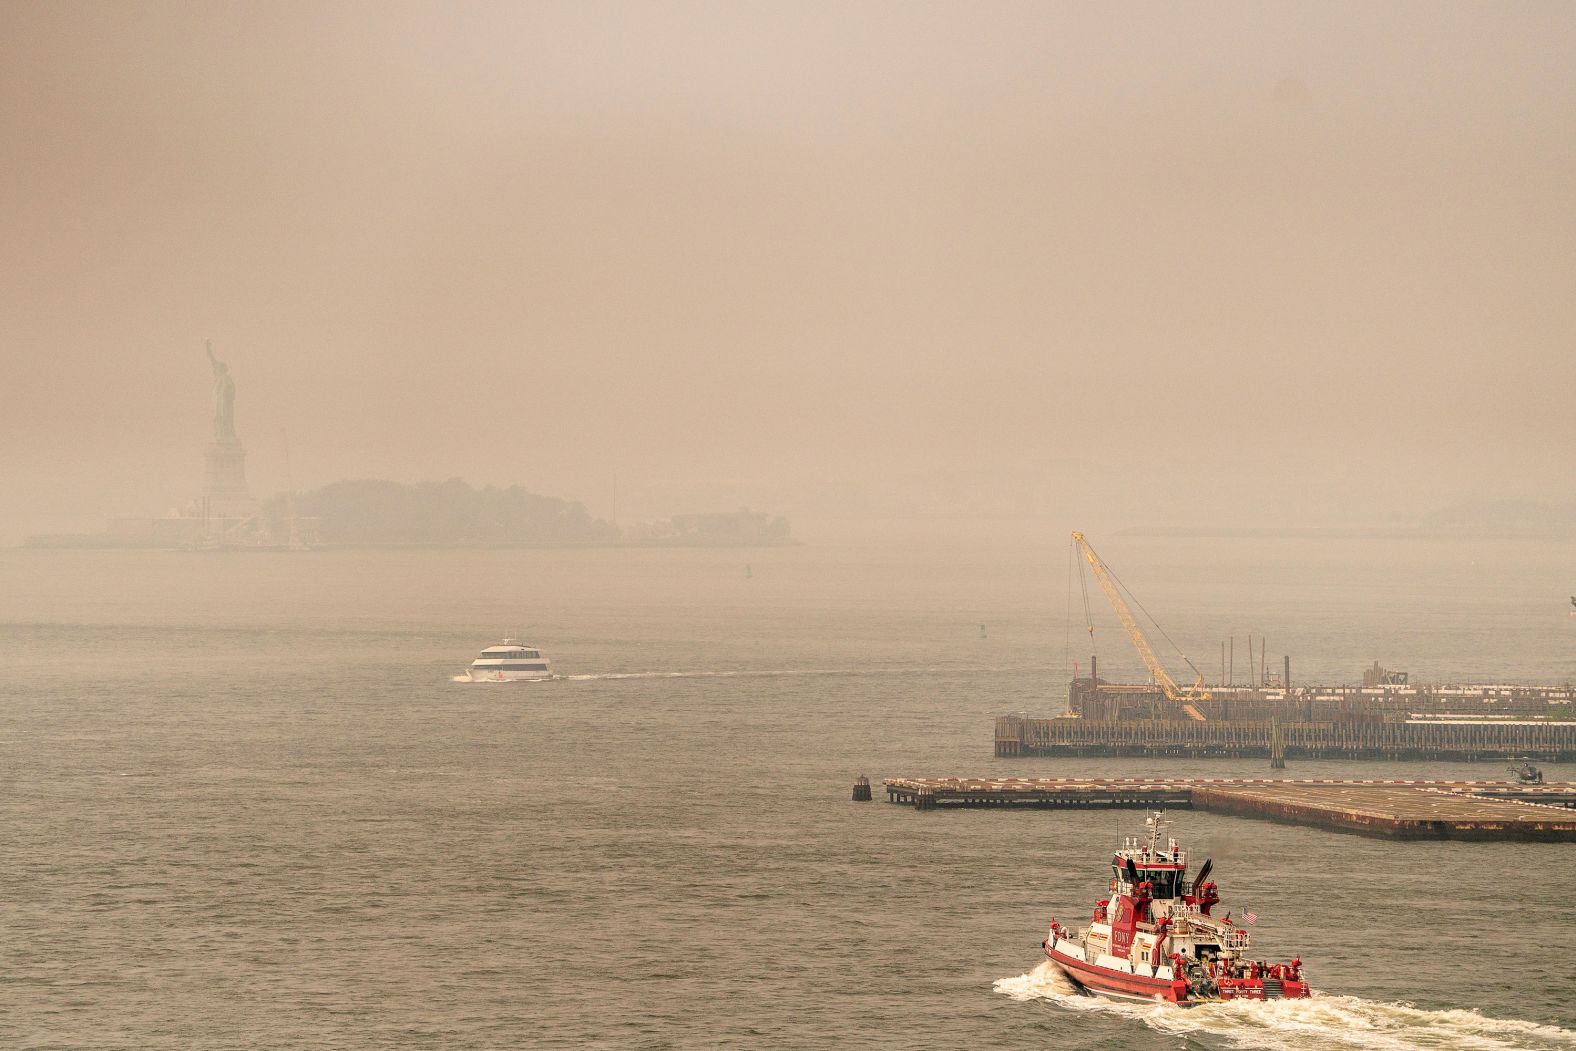 Smoke from wildfires in Canada shrouds the view of the Statue of Liberty on Friday in New York.